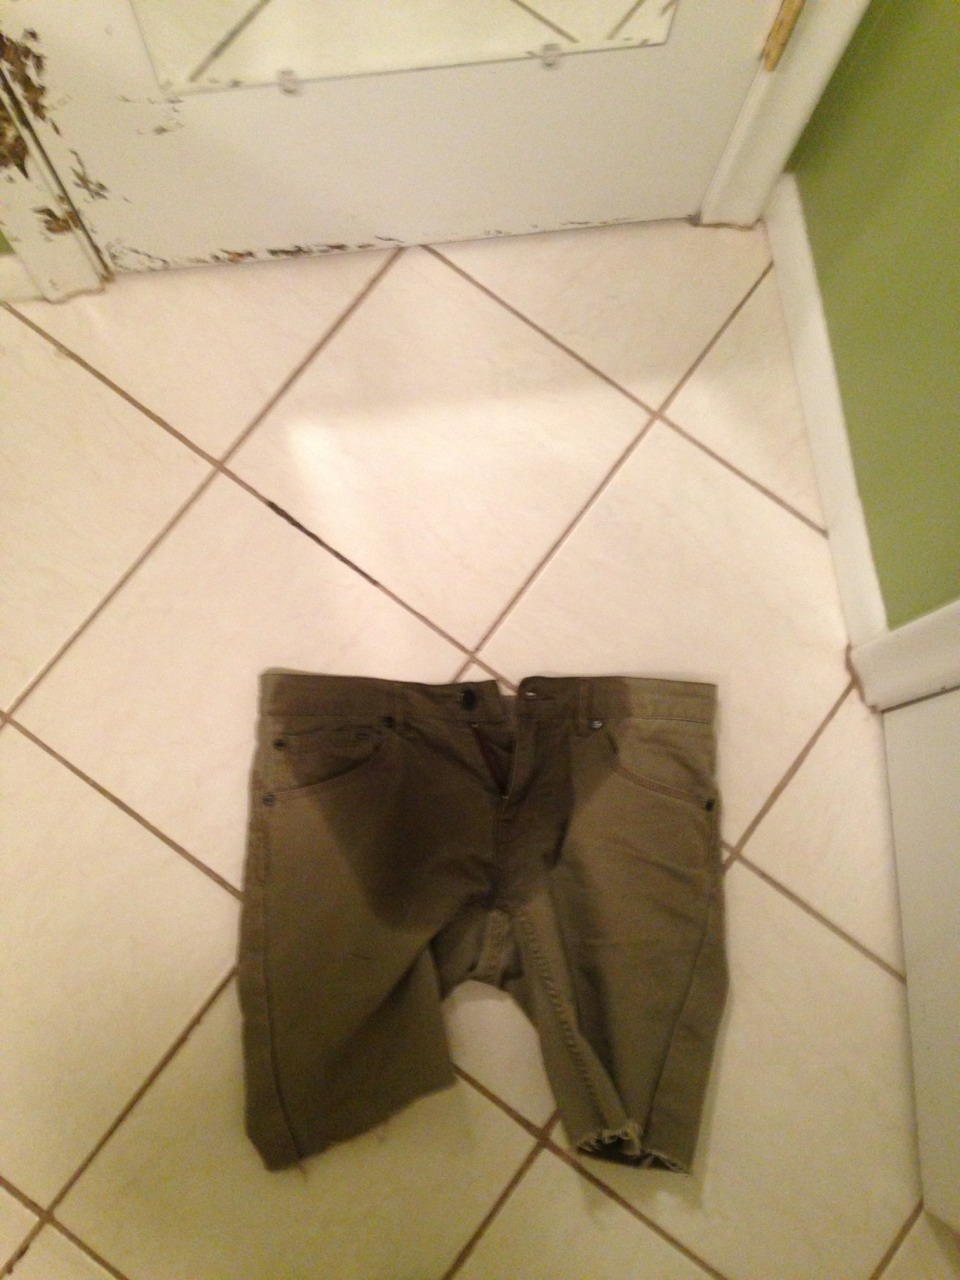 wettingmike:  Had a little bit of public pants wetting/messing fun in my shorts and